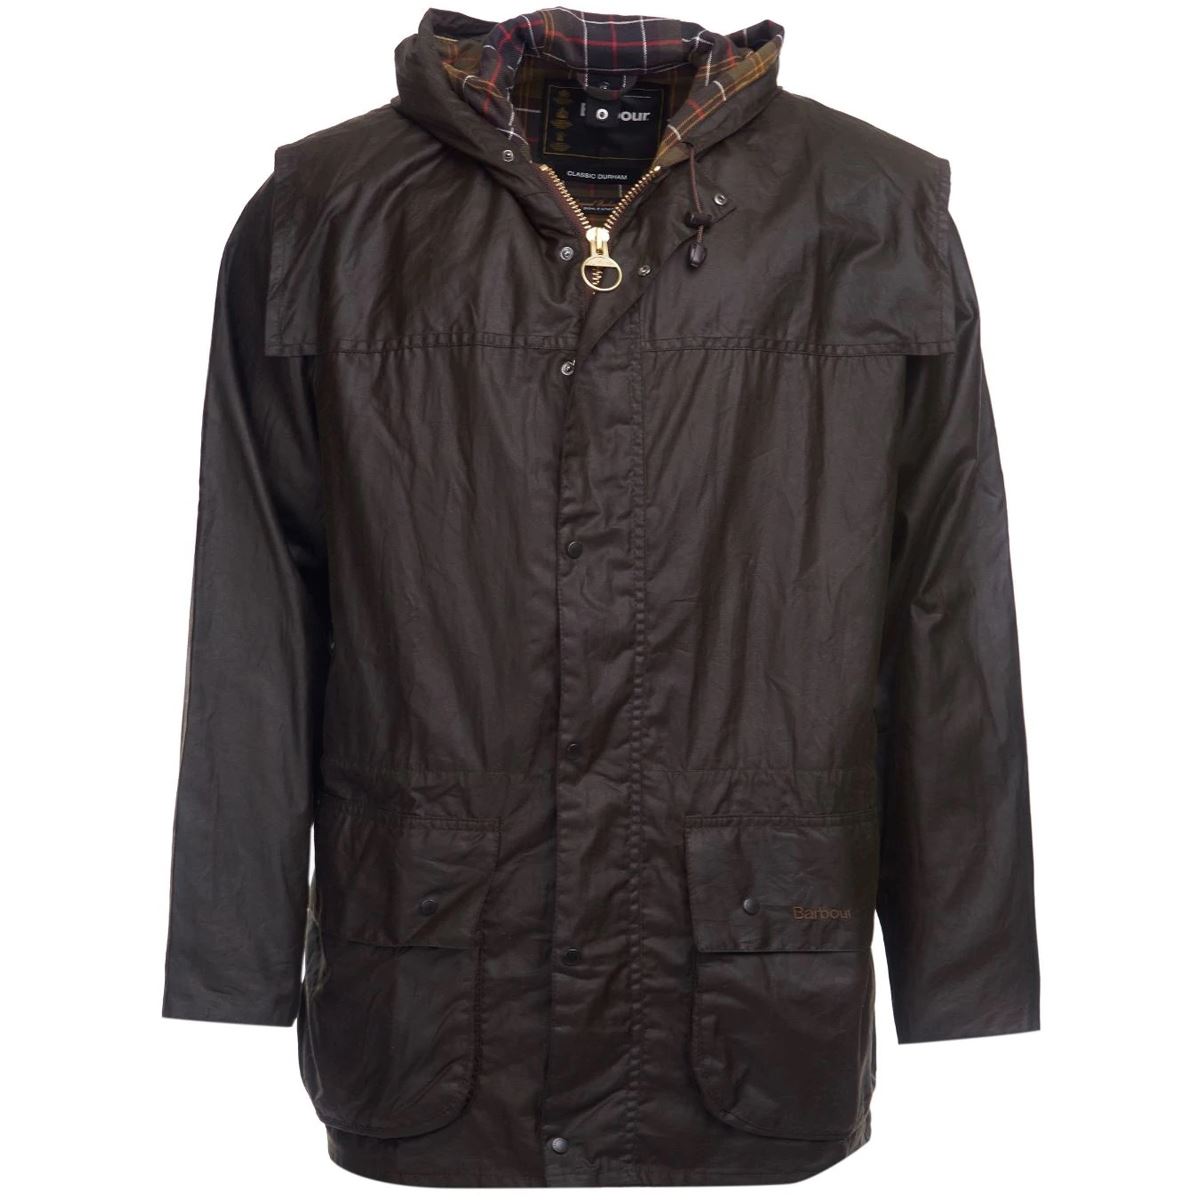 How to preserve the weather resistance of the Barbour Durham Jacket?